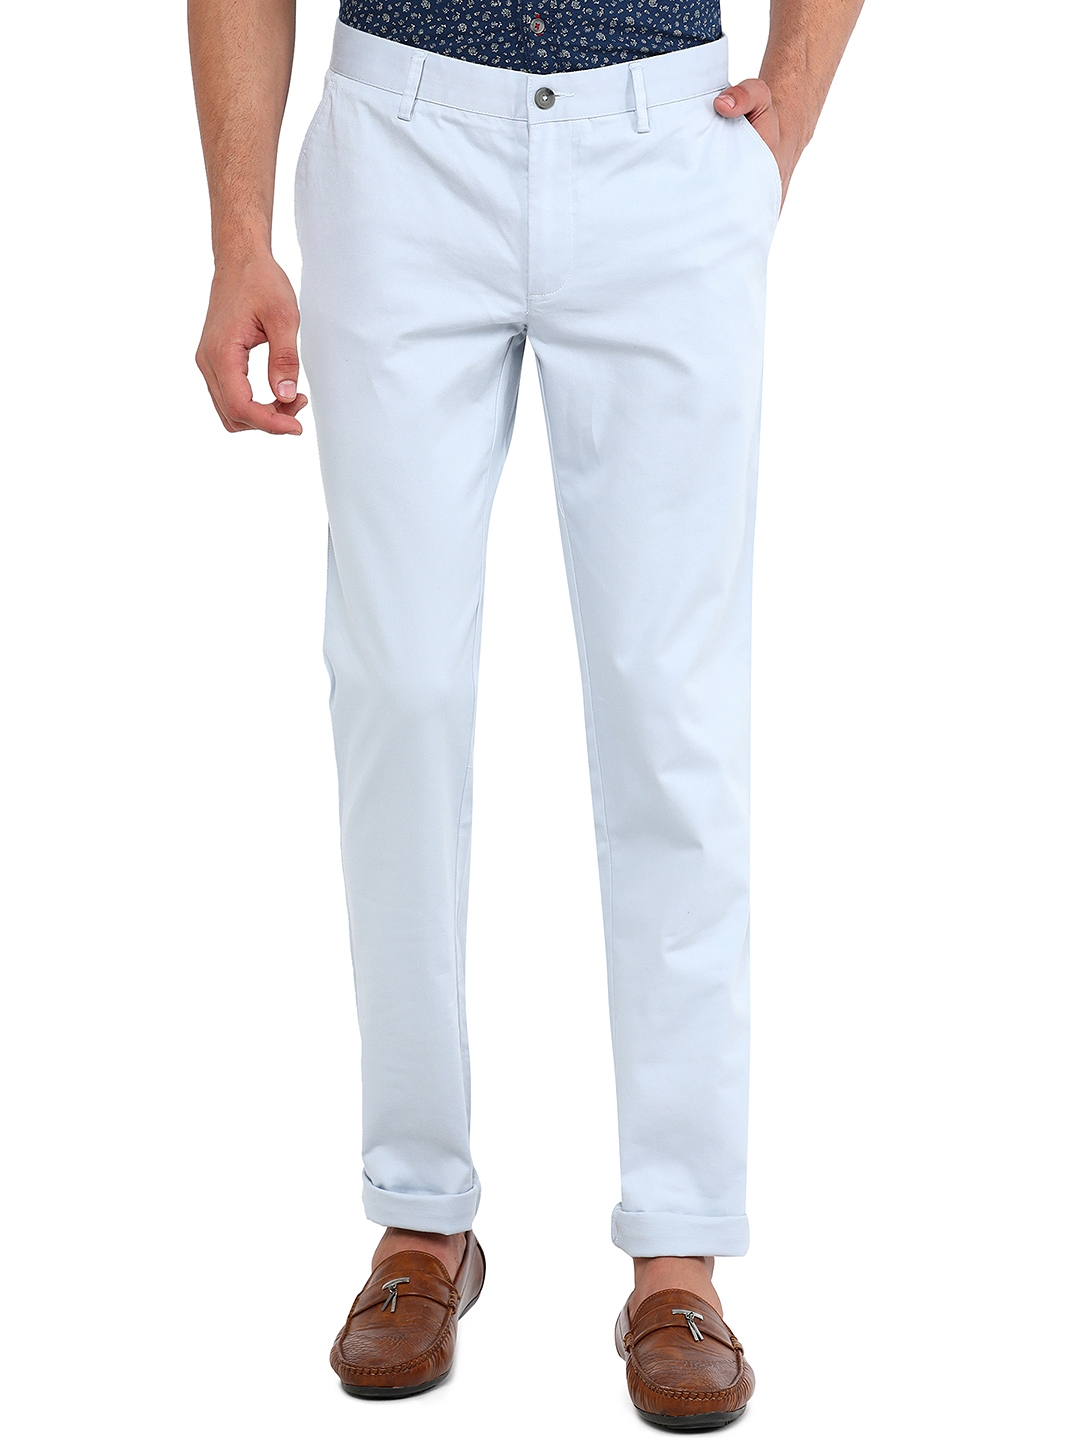 Greenfibre | Light Blue Solid Super Slim Fit Casual Trouser | Greenfibre